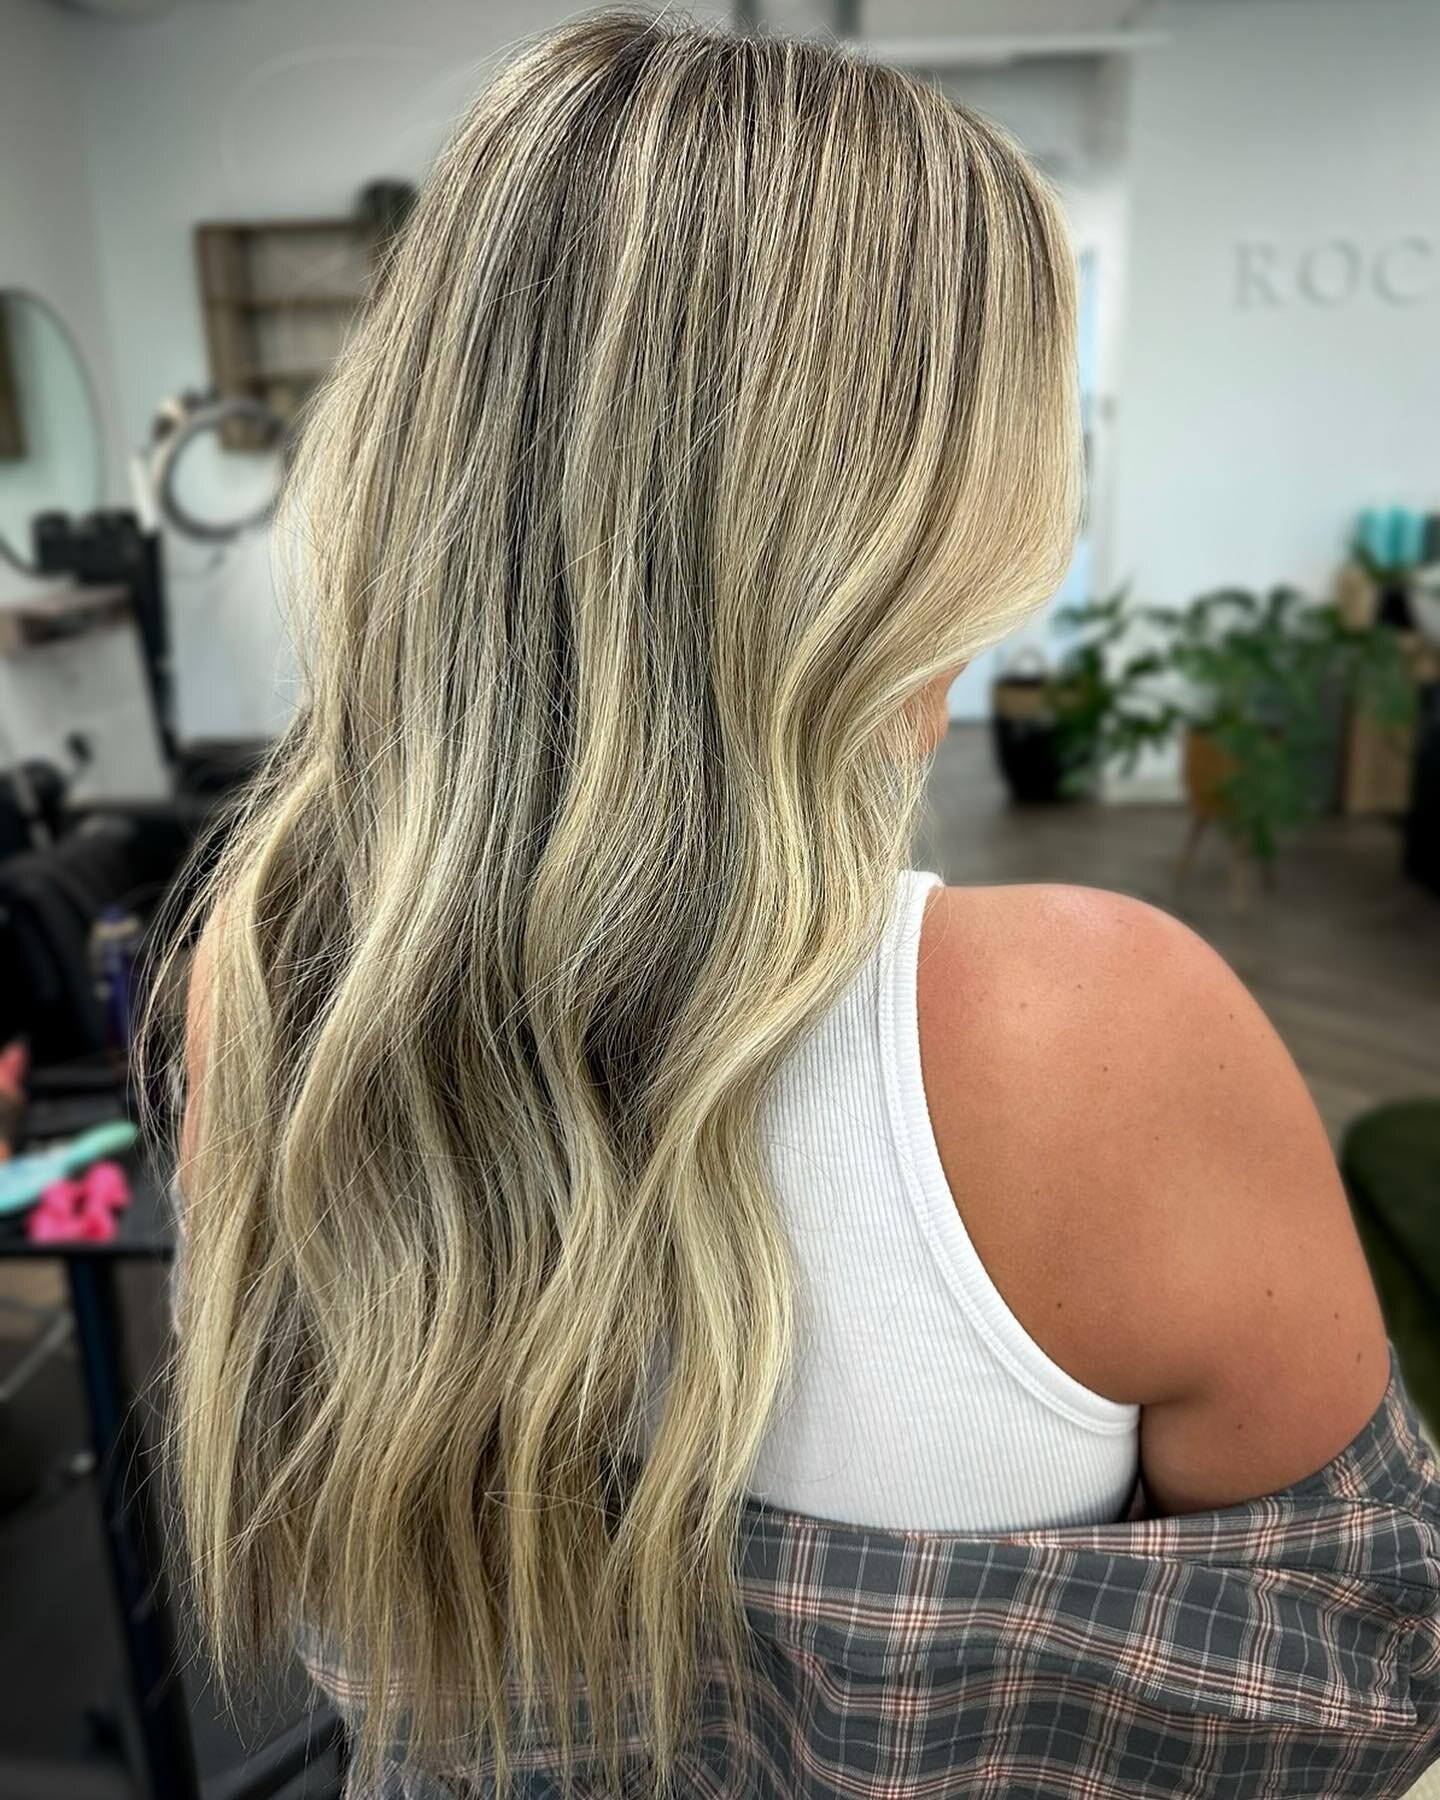 Good hair never goes out of style! 

@monroestyyles_nashville 

#nashville #nashvillebachelorette #nashvillehairstylist #nashvilleblogger #nashvilleblonde #nashvilleblondespecialist #nashvillesalon #nashvillehairstylist #nashvilletennessee #nashville